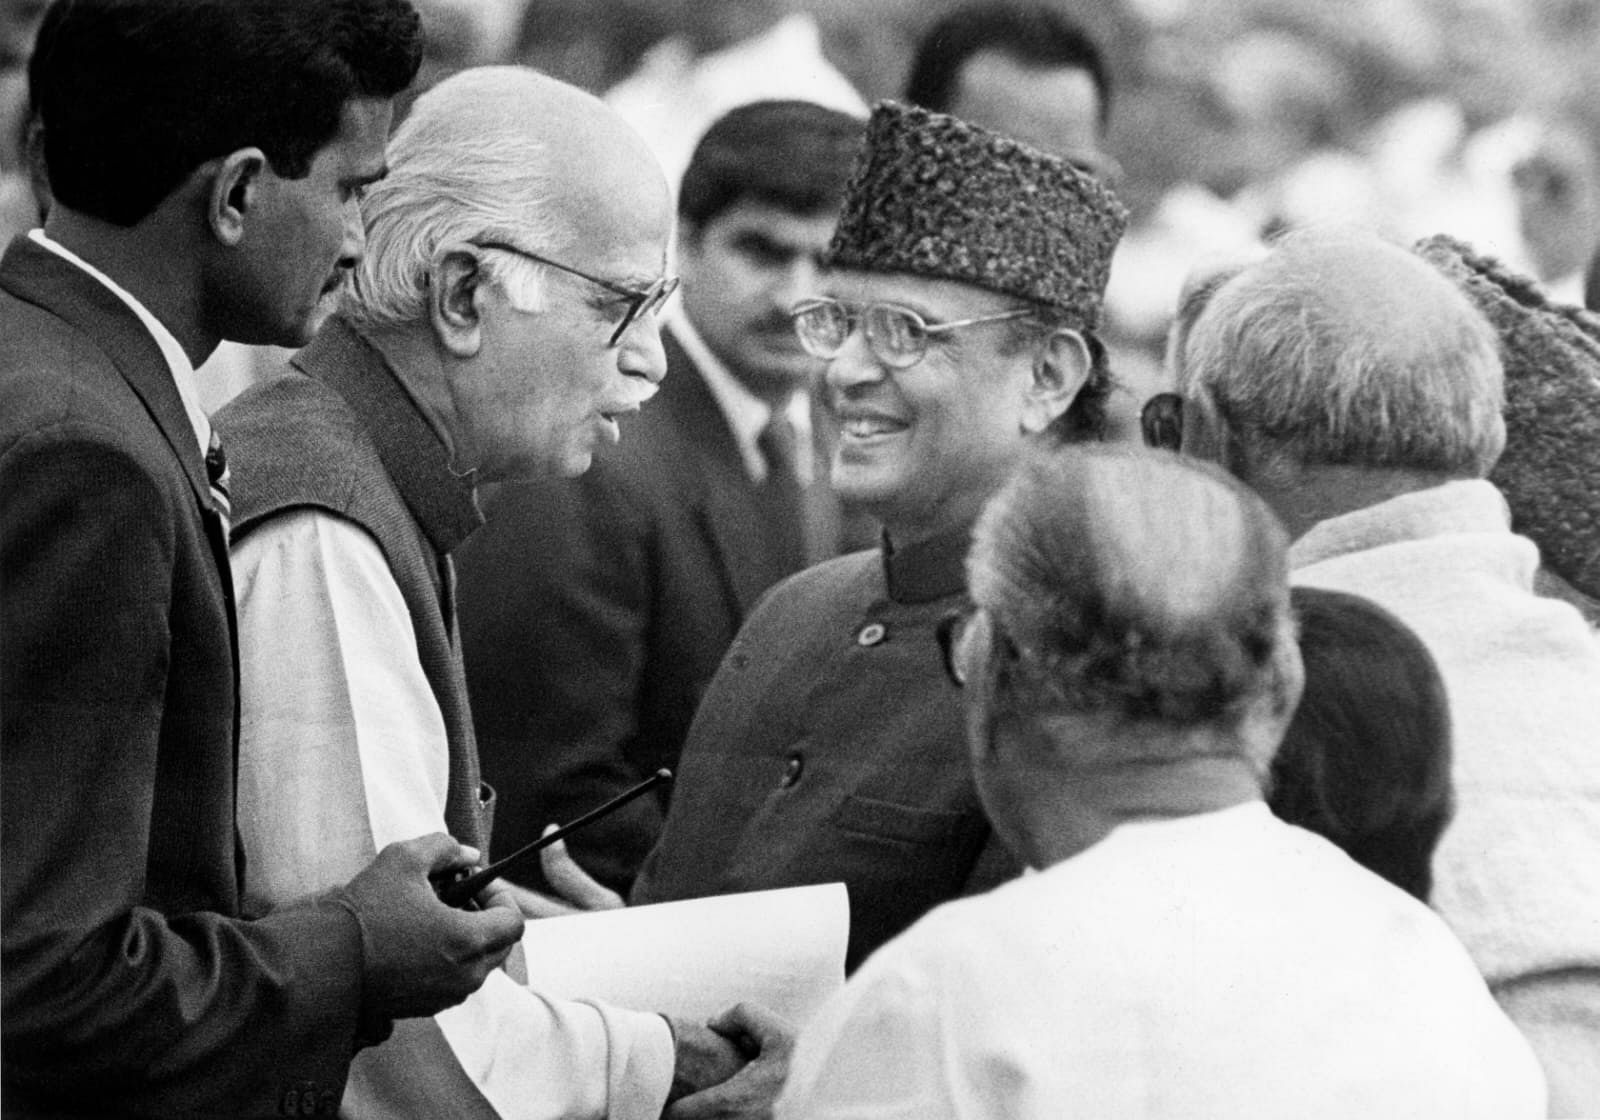 Advani, then a cabinet minister in the Vajpayee government, with VP Singh after taking the oath of office in 1998 | Photo: Praveen Jain